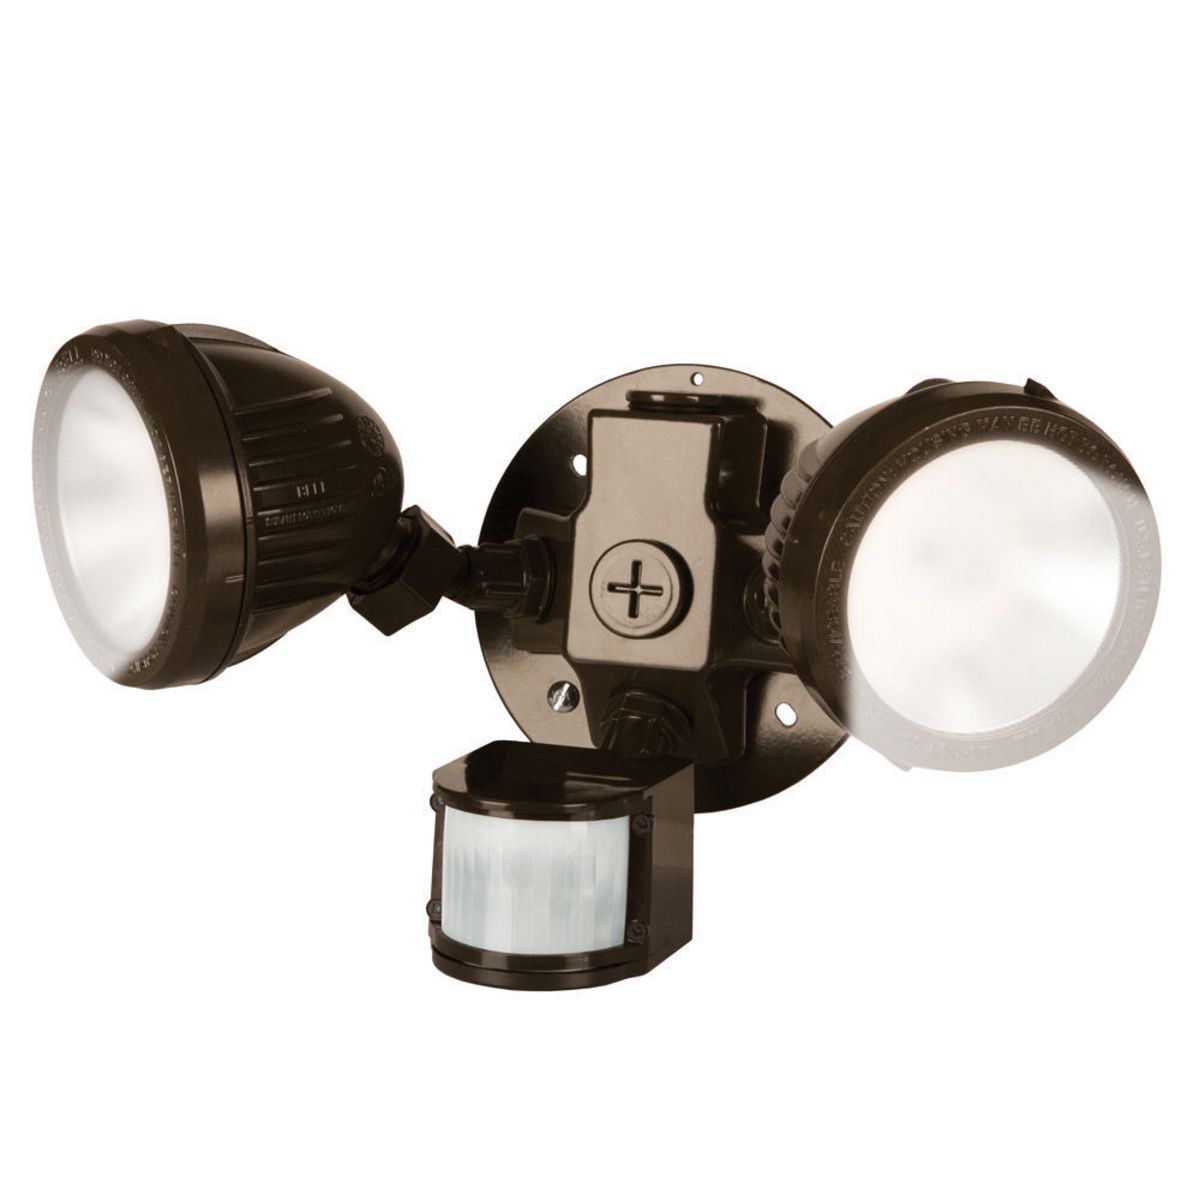 2 LED Lampholders with Round Box, Cover with Motion Sensor, Bronze